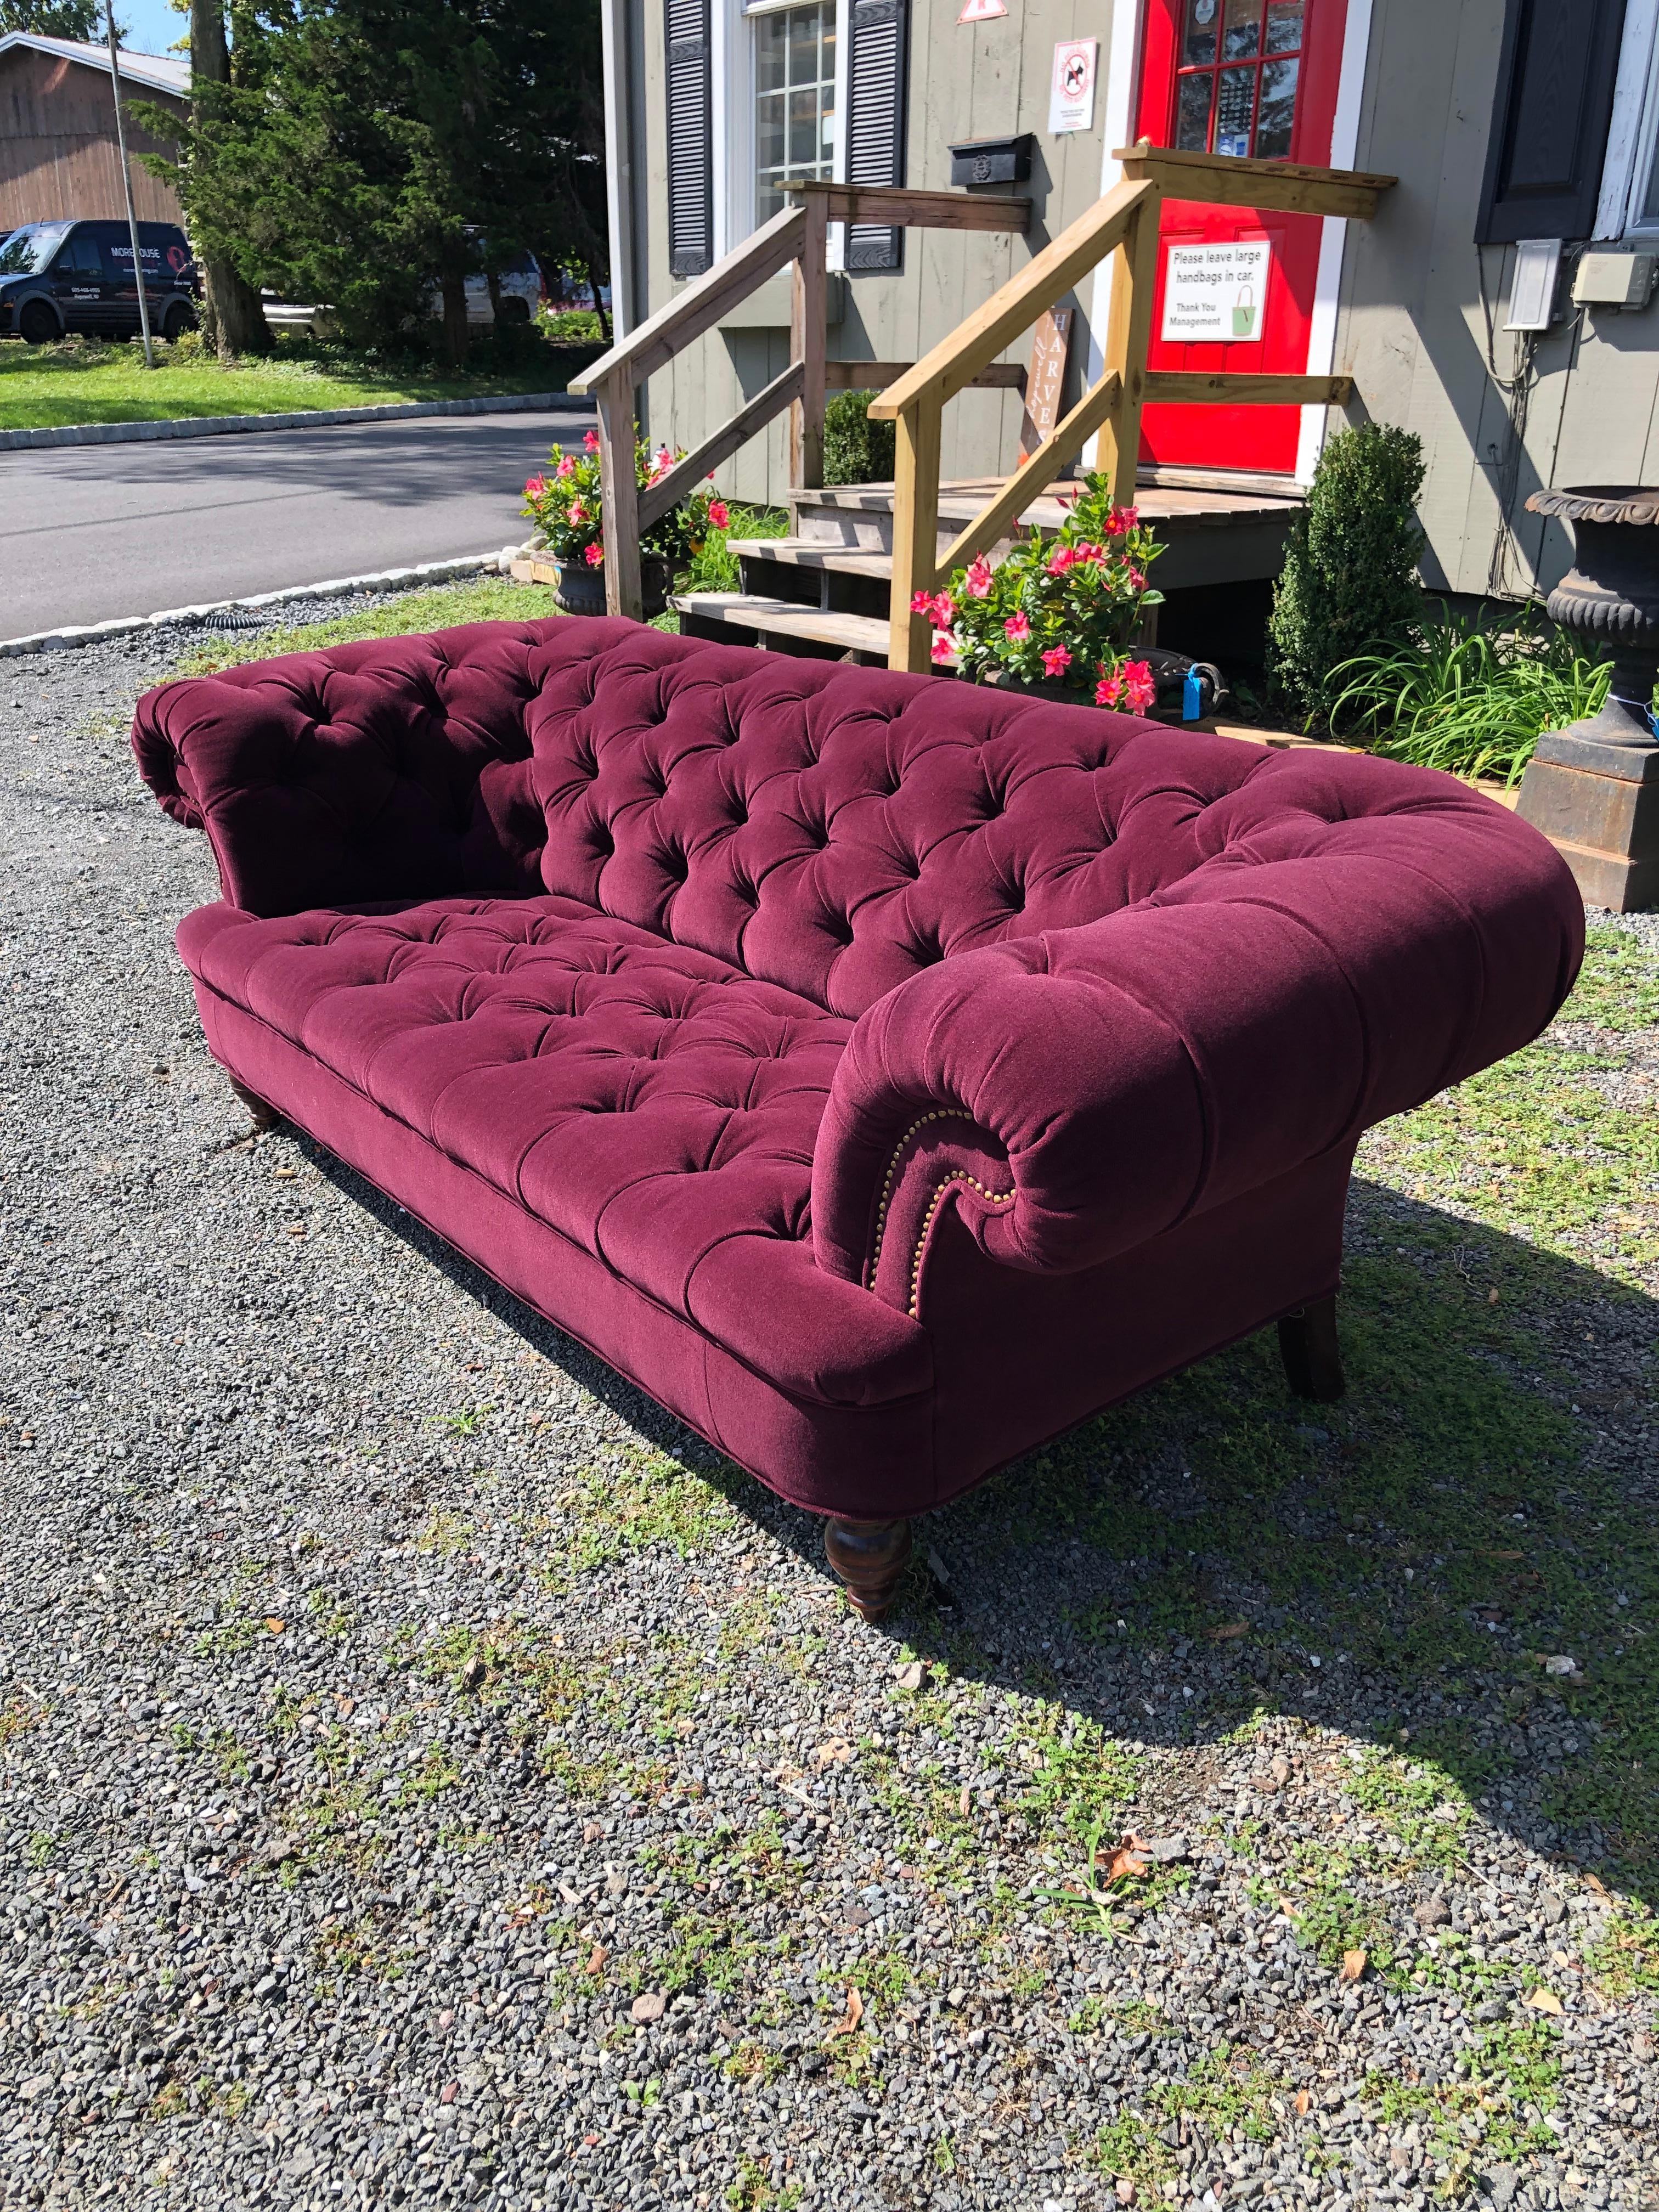 An iconic symbol of traditional British design and craftsmaship, the tufted Chesterfield sofa as sumptuously upholstered in new plum purple mohair and finished with brass nailheads.
seat depth 22